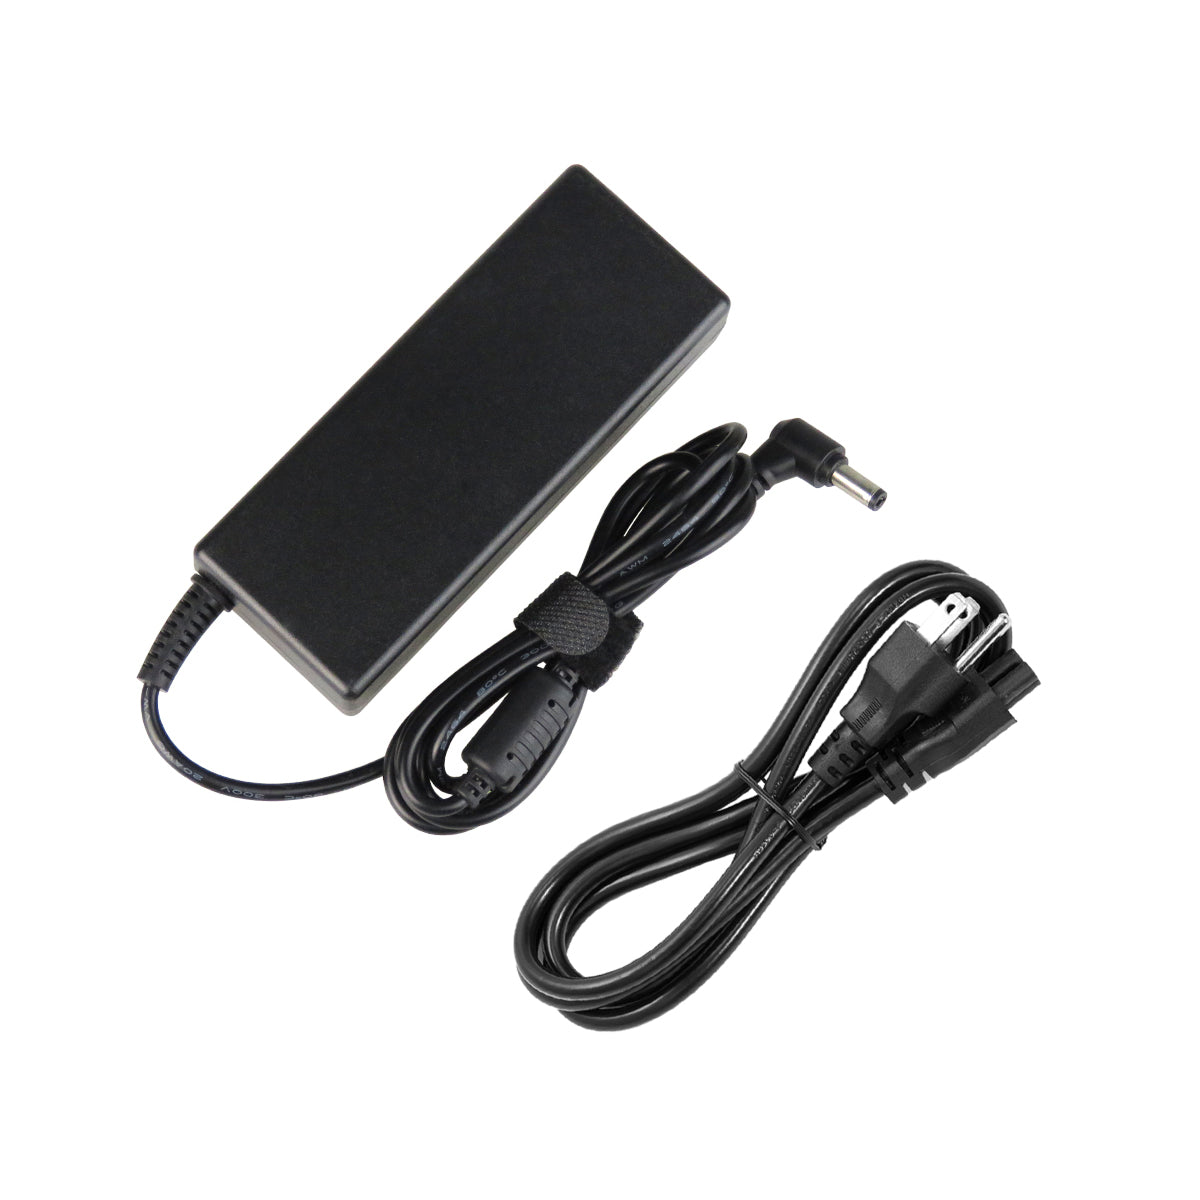 AC Adapter Charger for ASUS X50V Notebook.